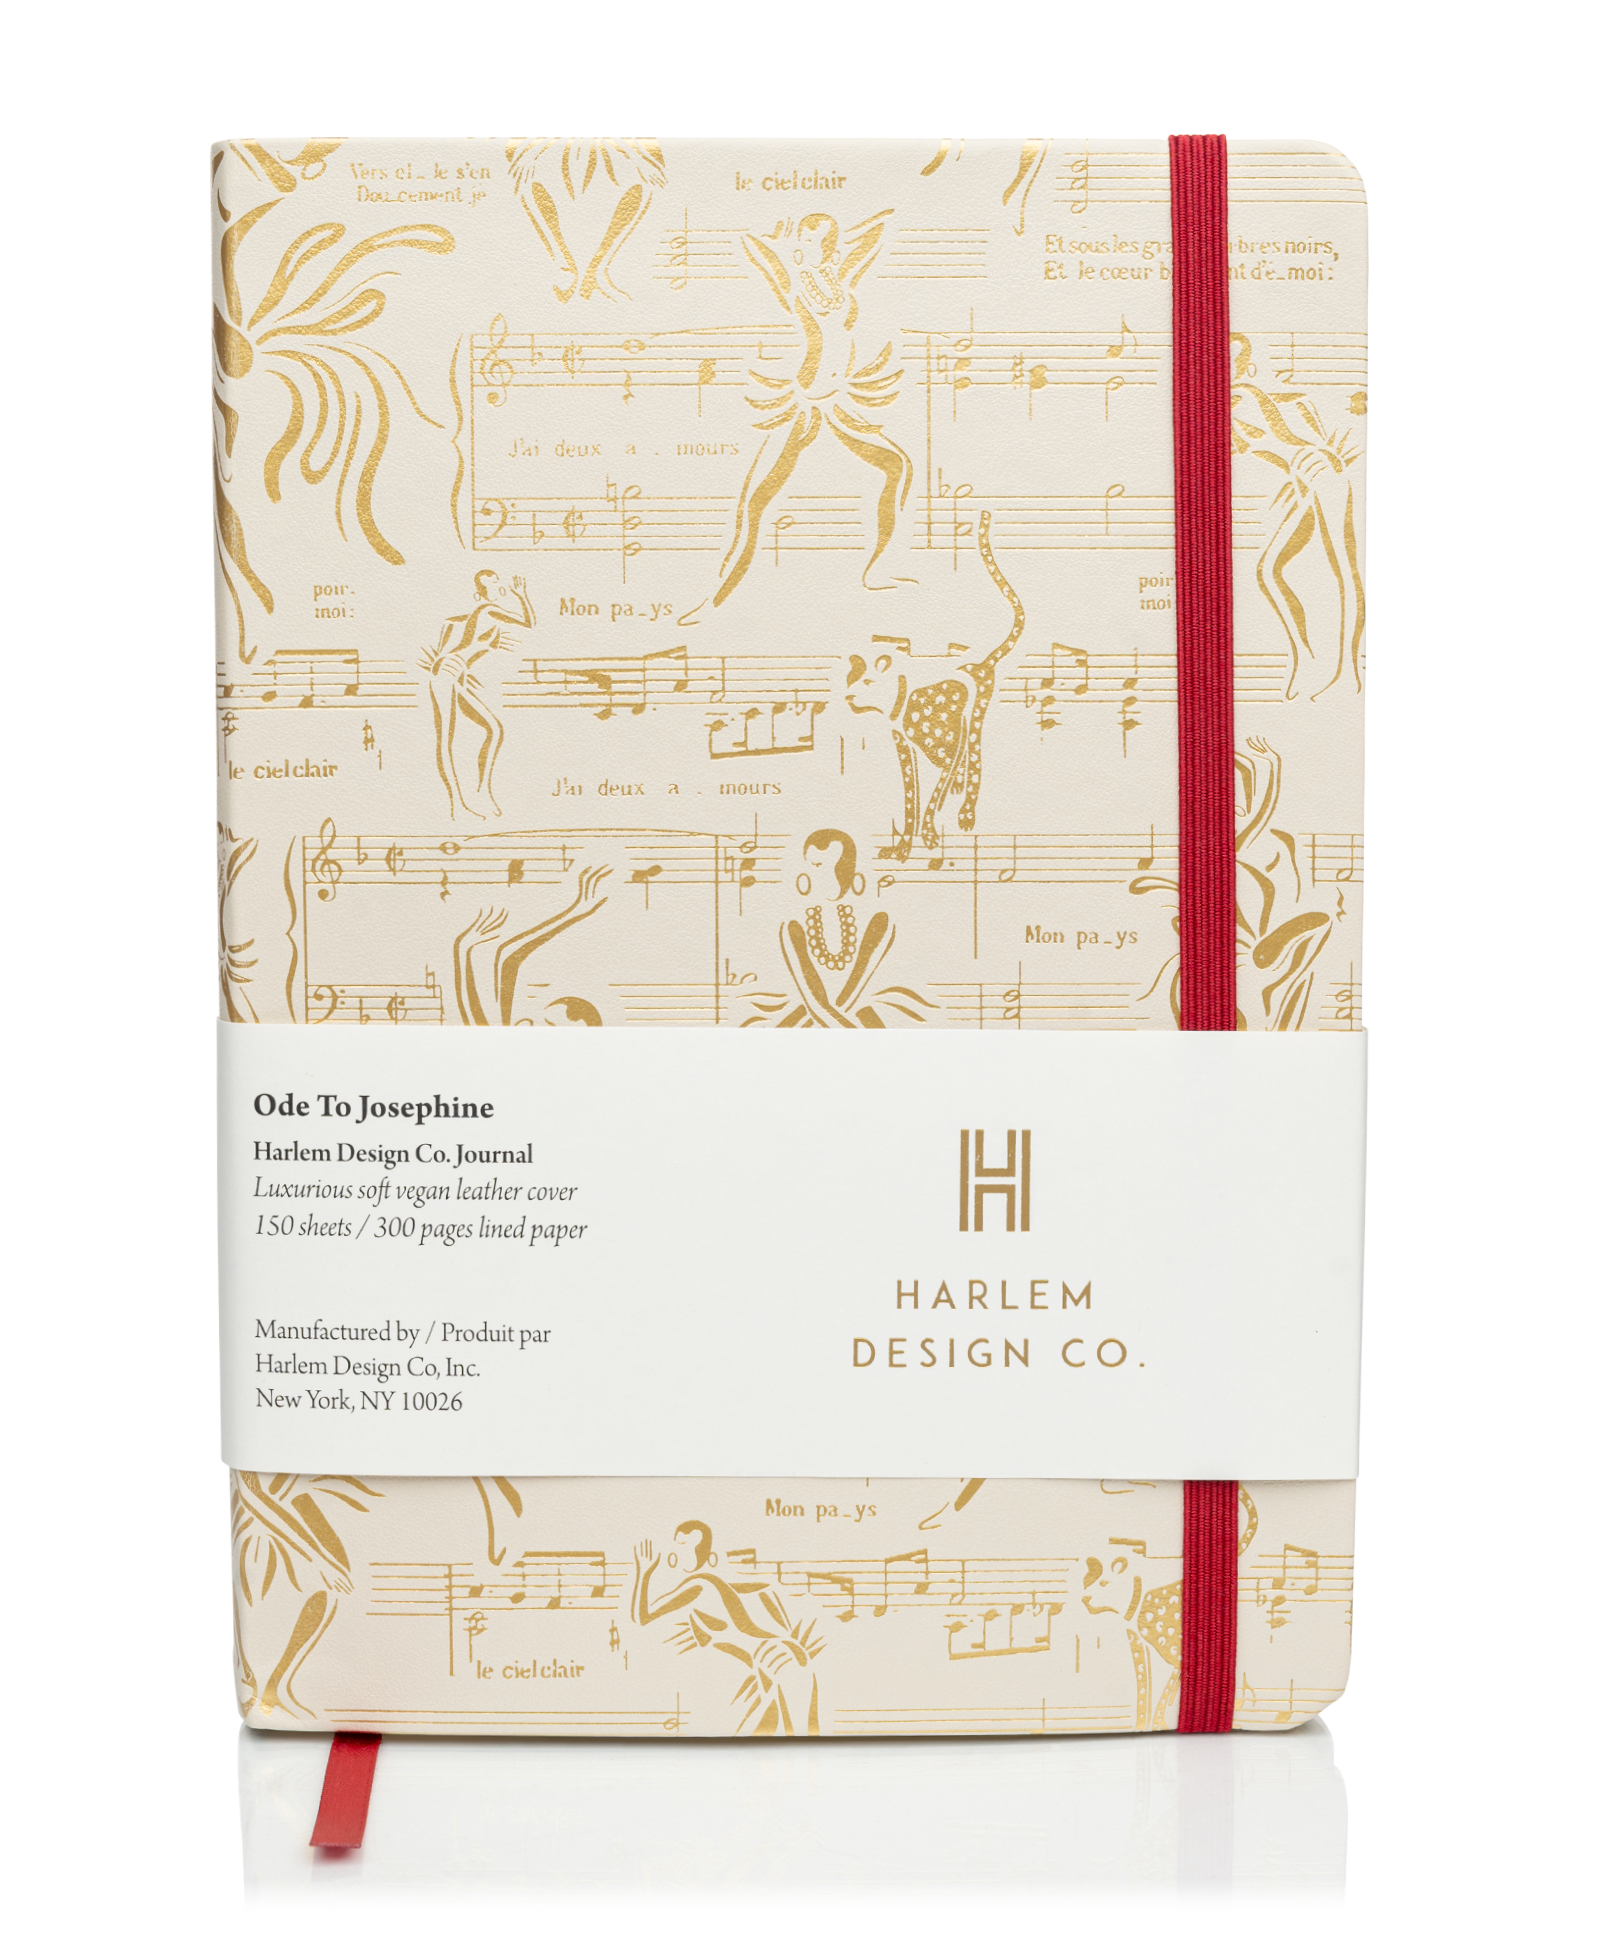 This is a product image of the Harlem Design Co Josephine journal in Cream and Gold.  This image has the product information sleeve on the outside.